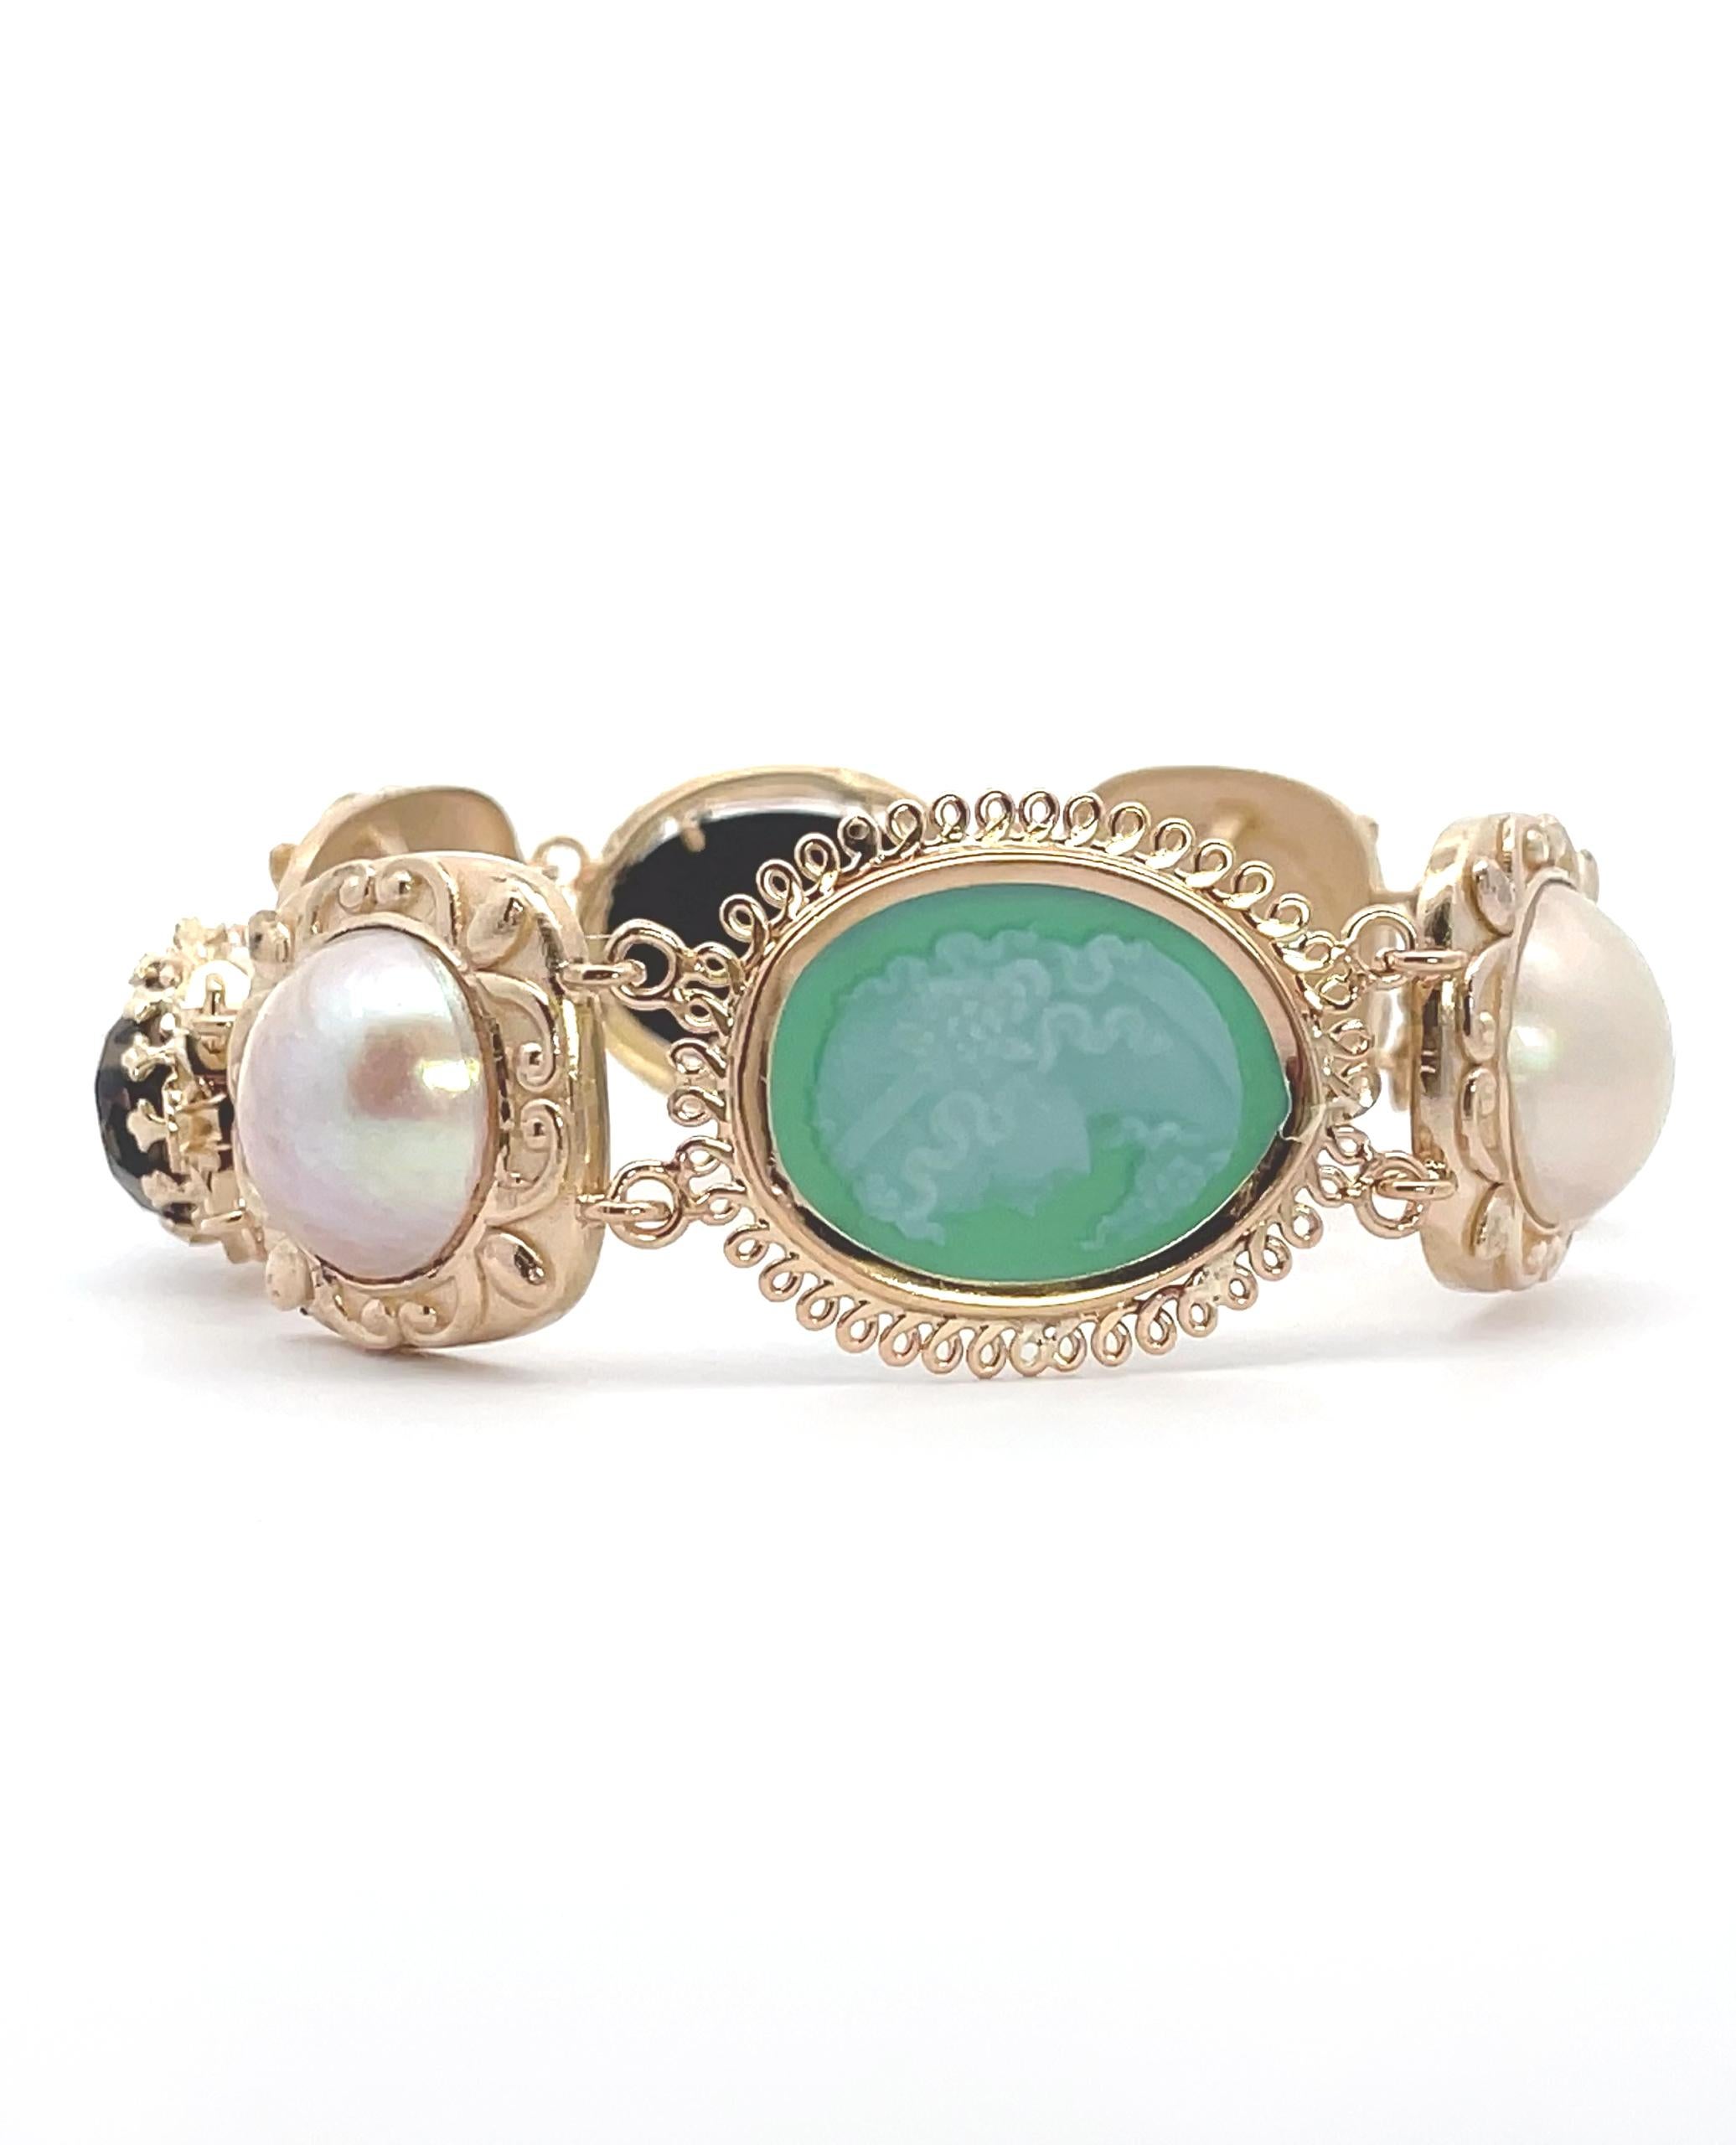 Art Nouveau Vintage Components -14K Yellow Gold Mobe Pearl, Cameo and Smokey Topaz Bracelet For Sale